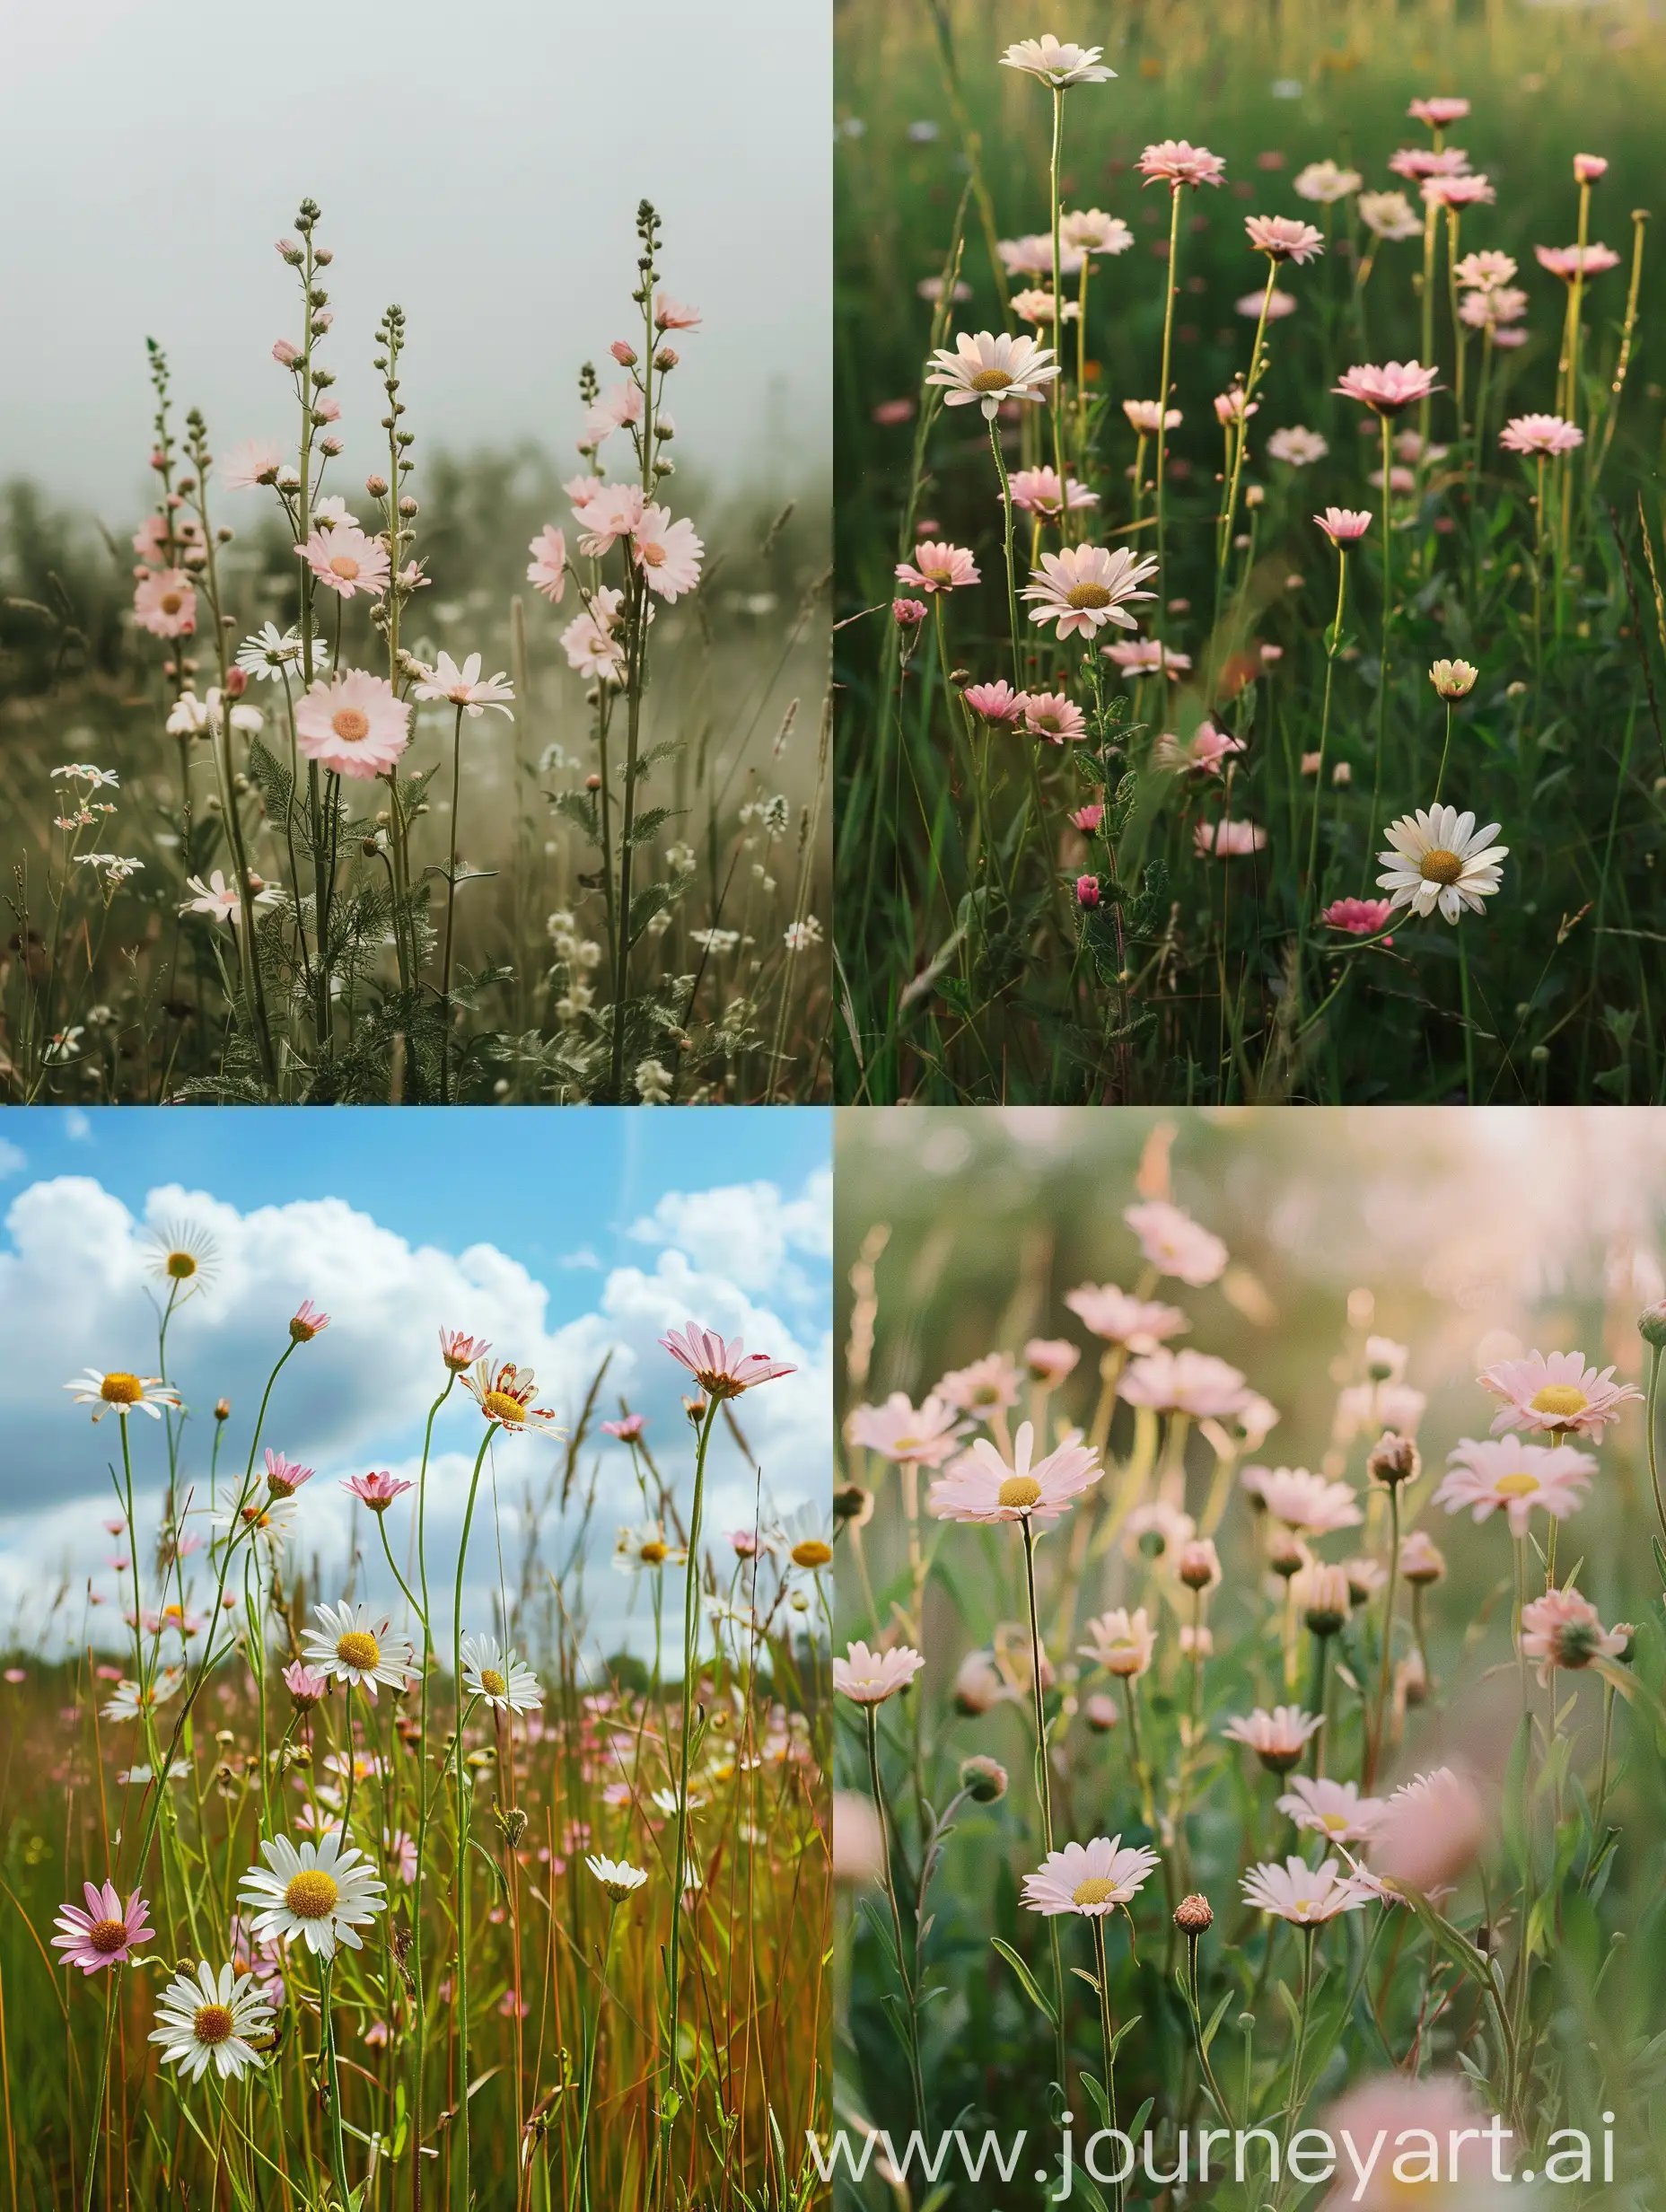 tall wild daisies in long gras with pink flowers